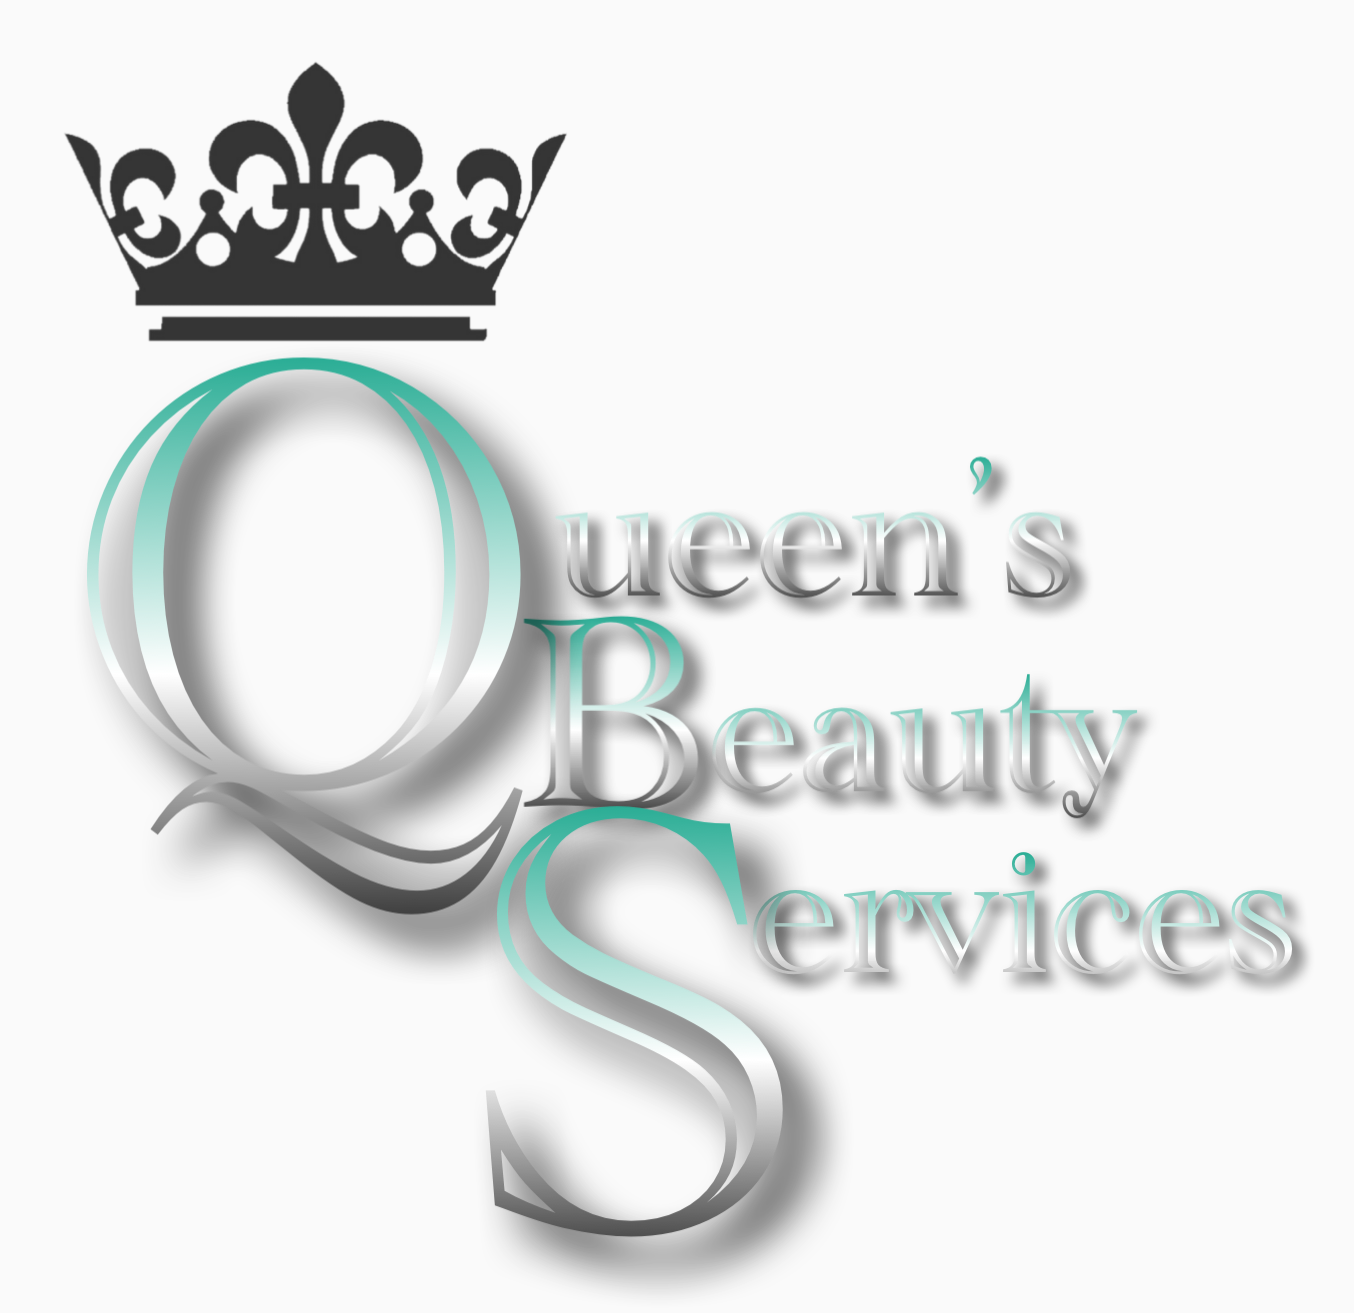 Queen's Beauty Services